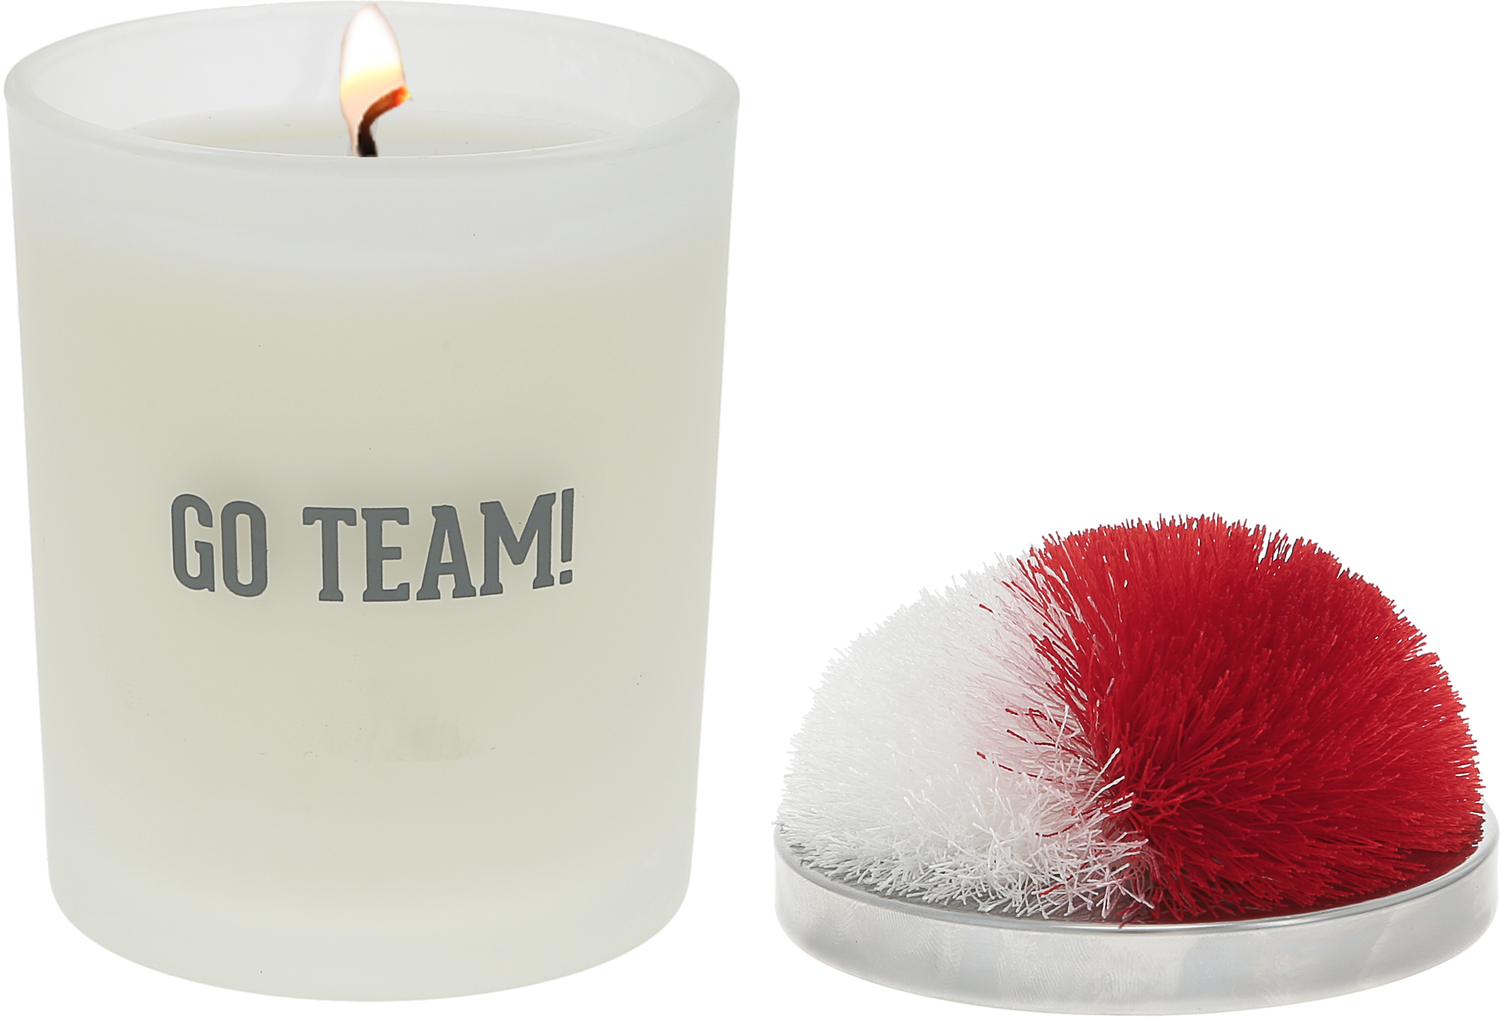 Go Team! - Red & White by Repre-Scent - Go Team! - Red & White - 5.5 oz - 100% Soy Wax Candle with Pom Pom Lid
Scent: Tranquility